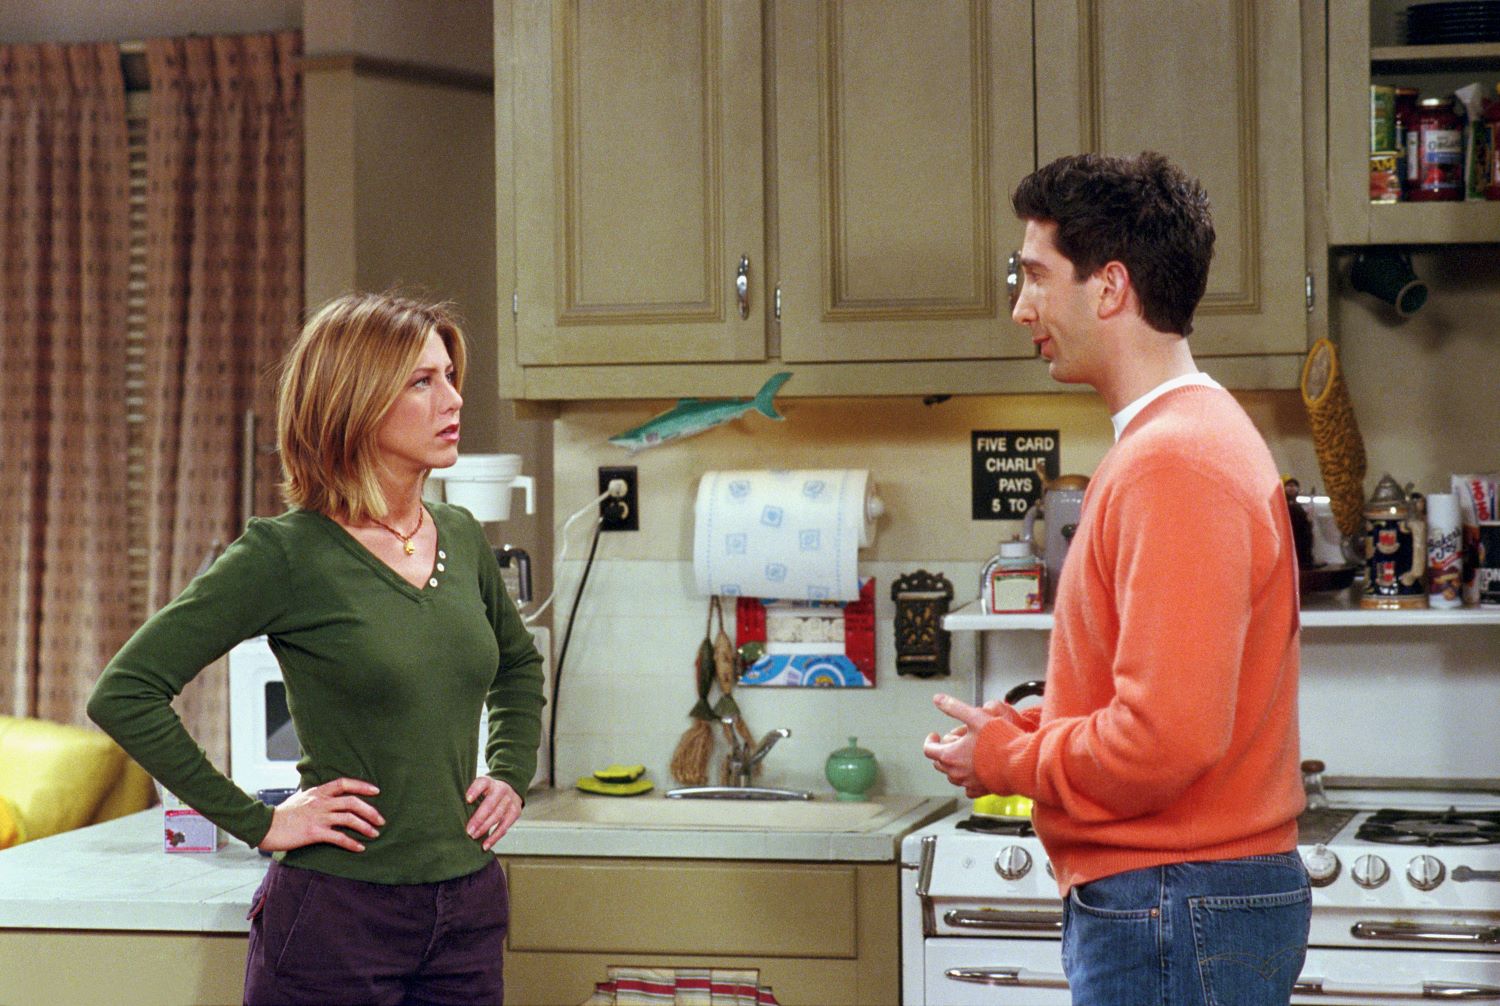 Jennifer Aniston and David Schwimmer film a scene for Friends in the iconic kitchen